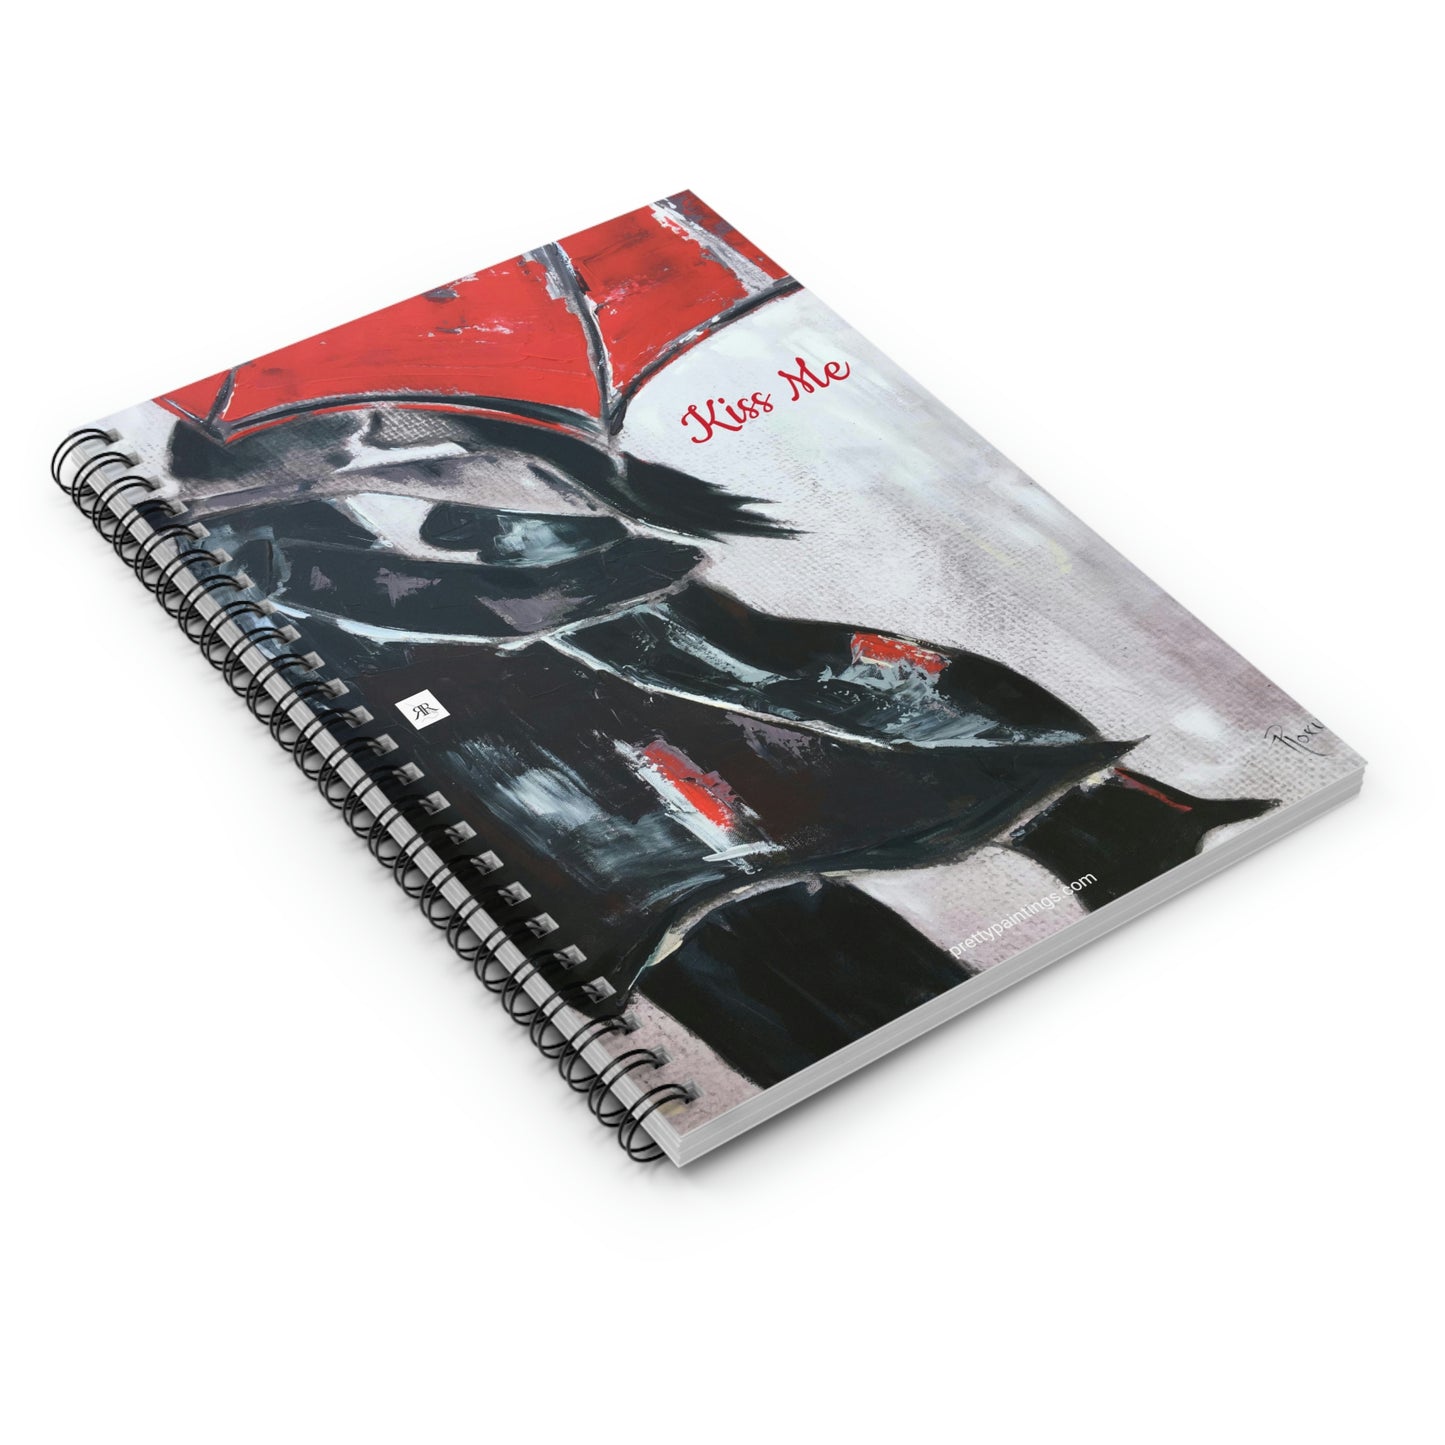 Romantic Couple under Red Umbrella "Kiss Me" Spiral Notebook